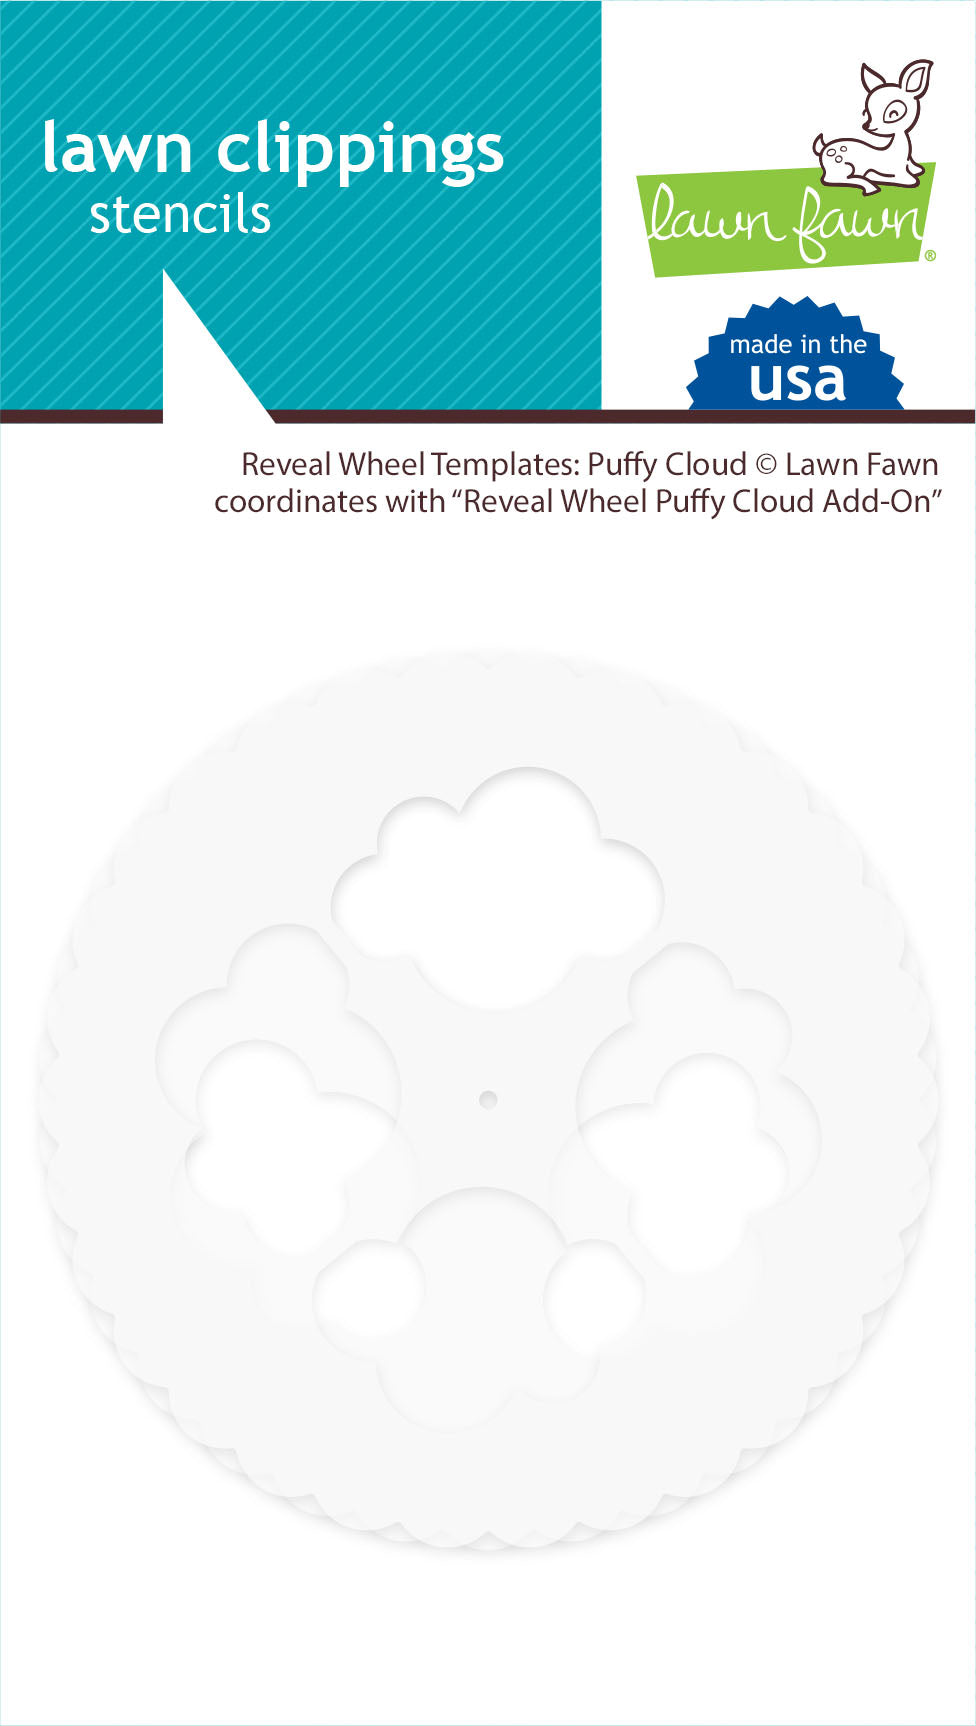 Reveal Wheel Templates: Puffy Cloud Add-On